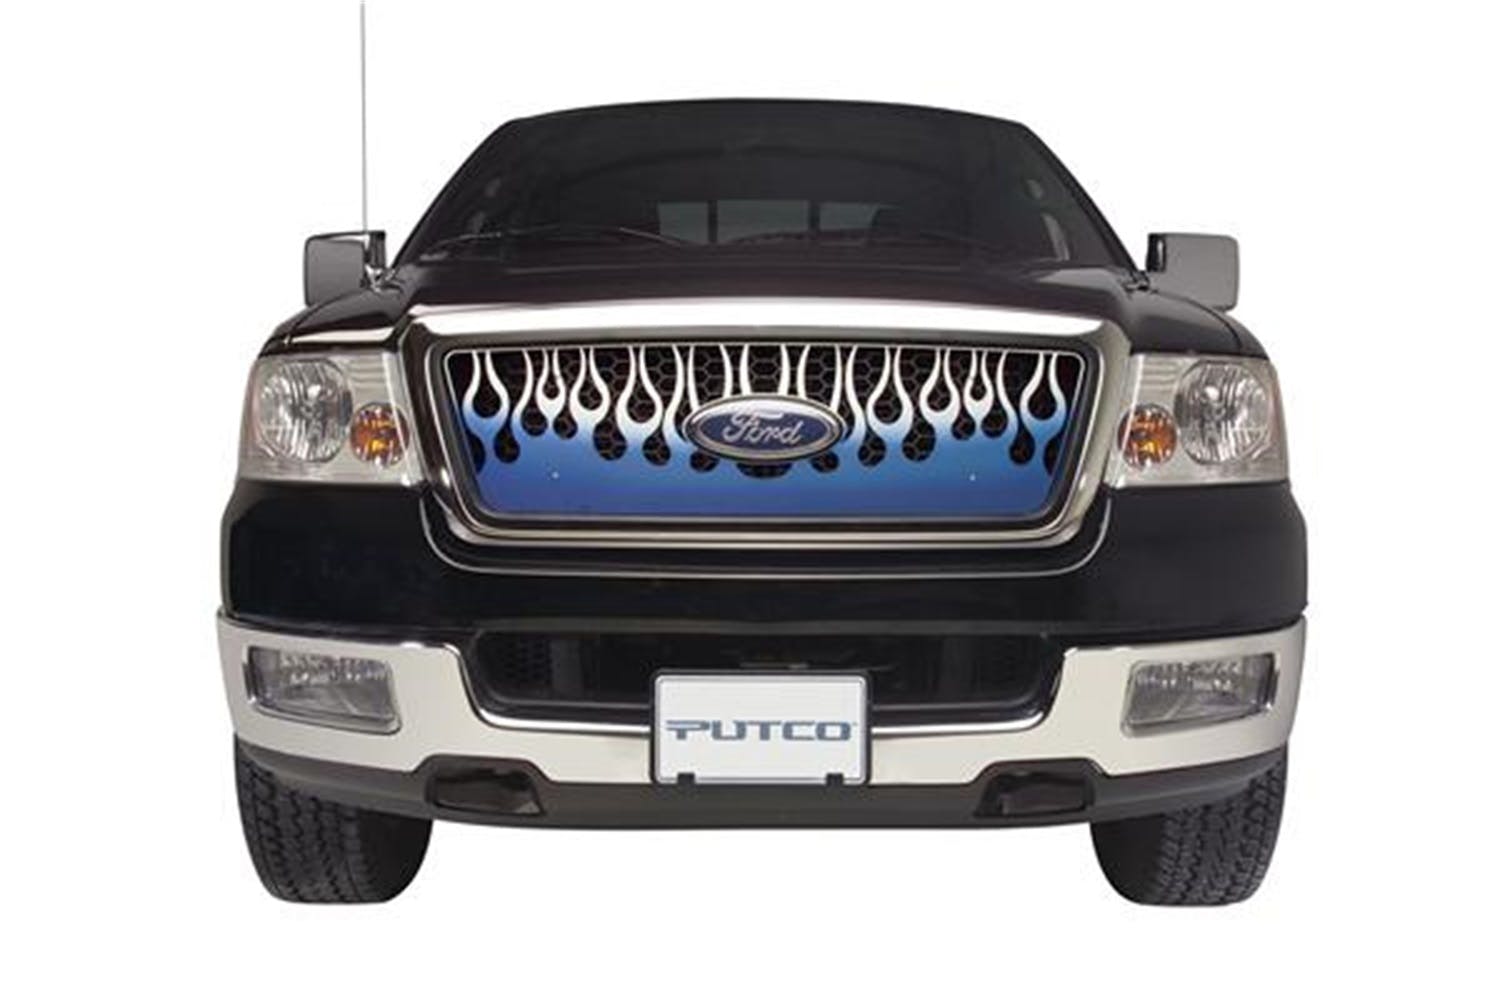 Putco 89429 Flaming Inferno Stainless Steel Grilles - Blue (Painted)